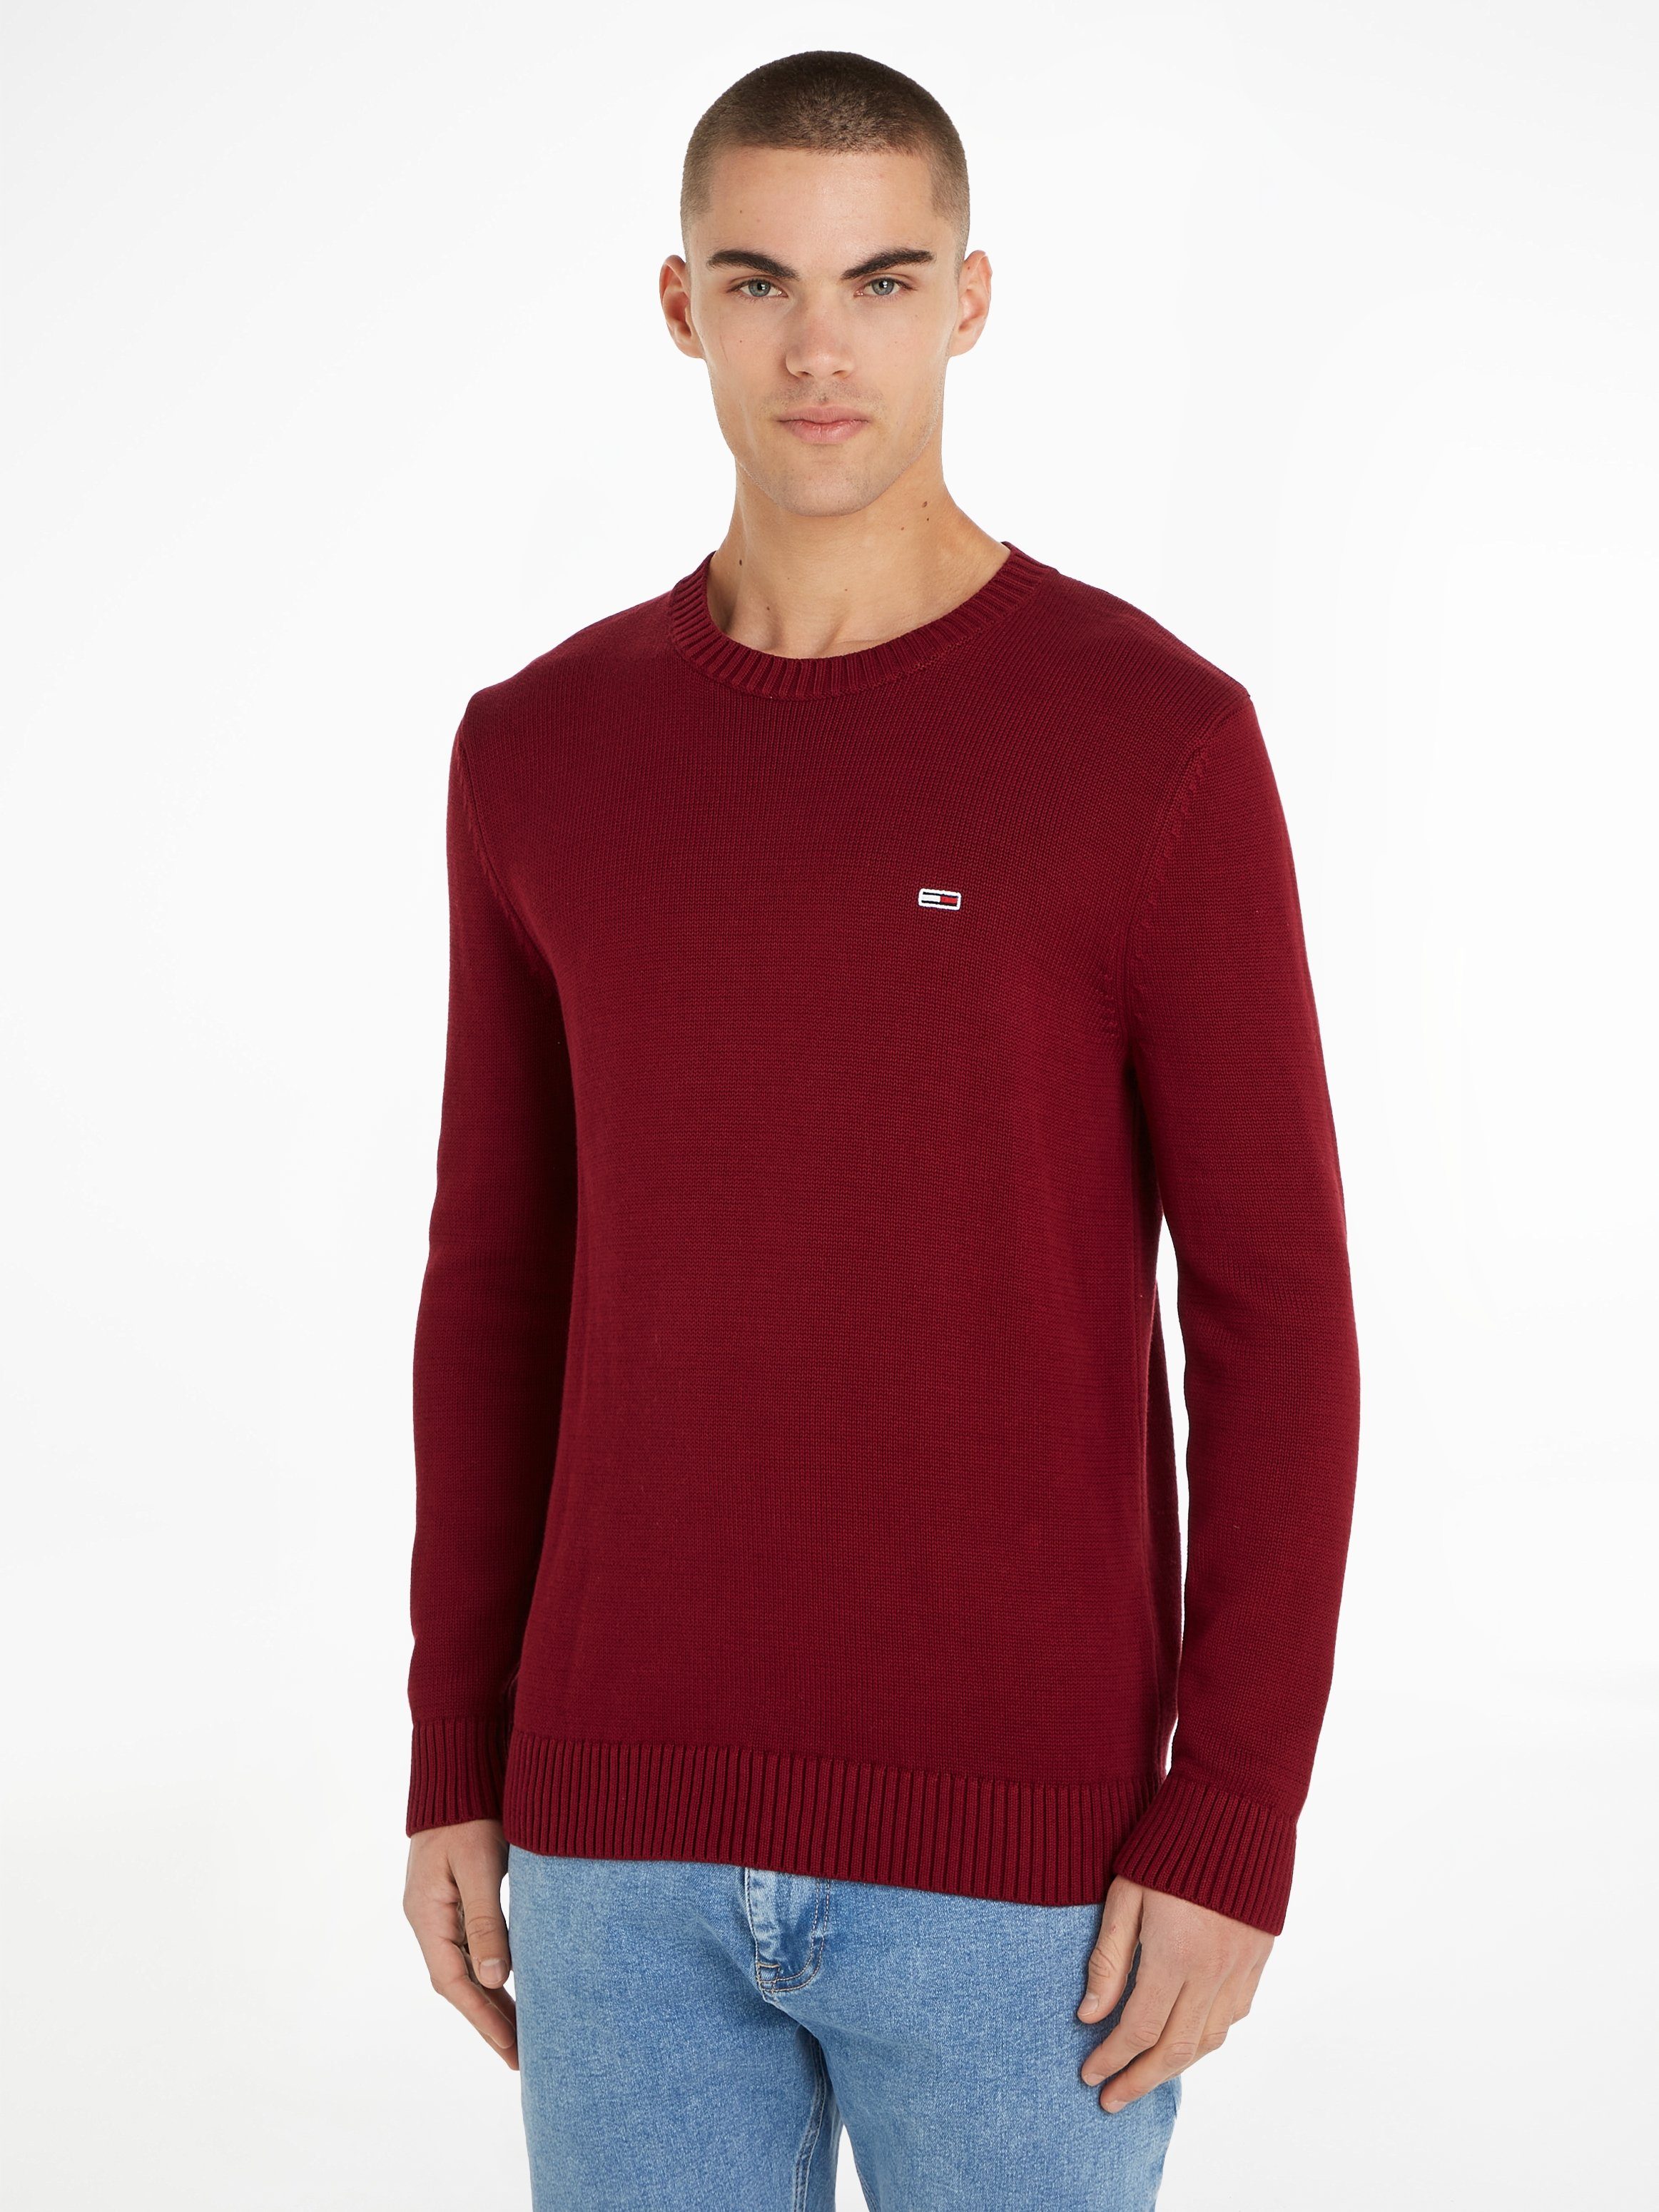 SWEATER ESSENTIAL CREW Jeans Tommy TJM Strickpullover Rouge NECK